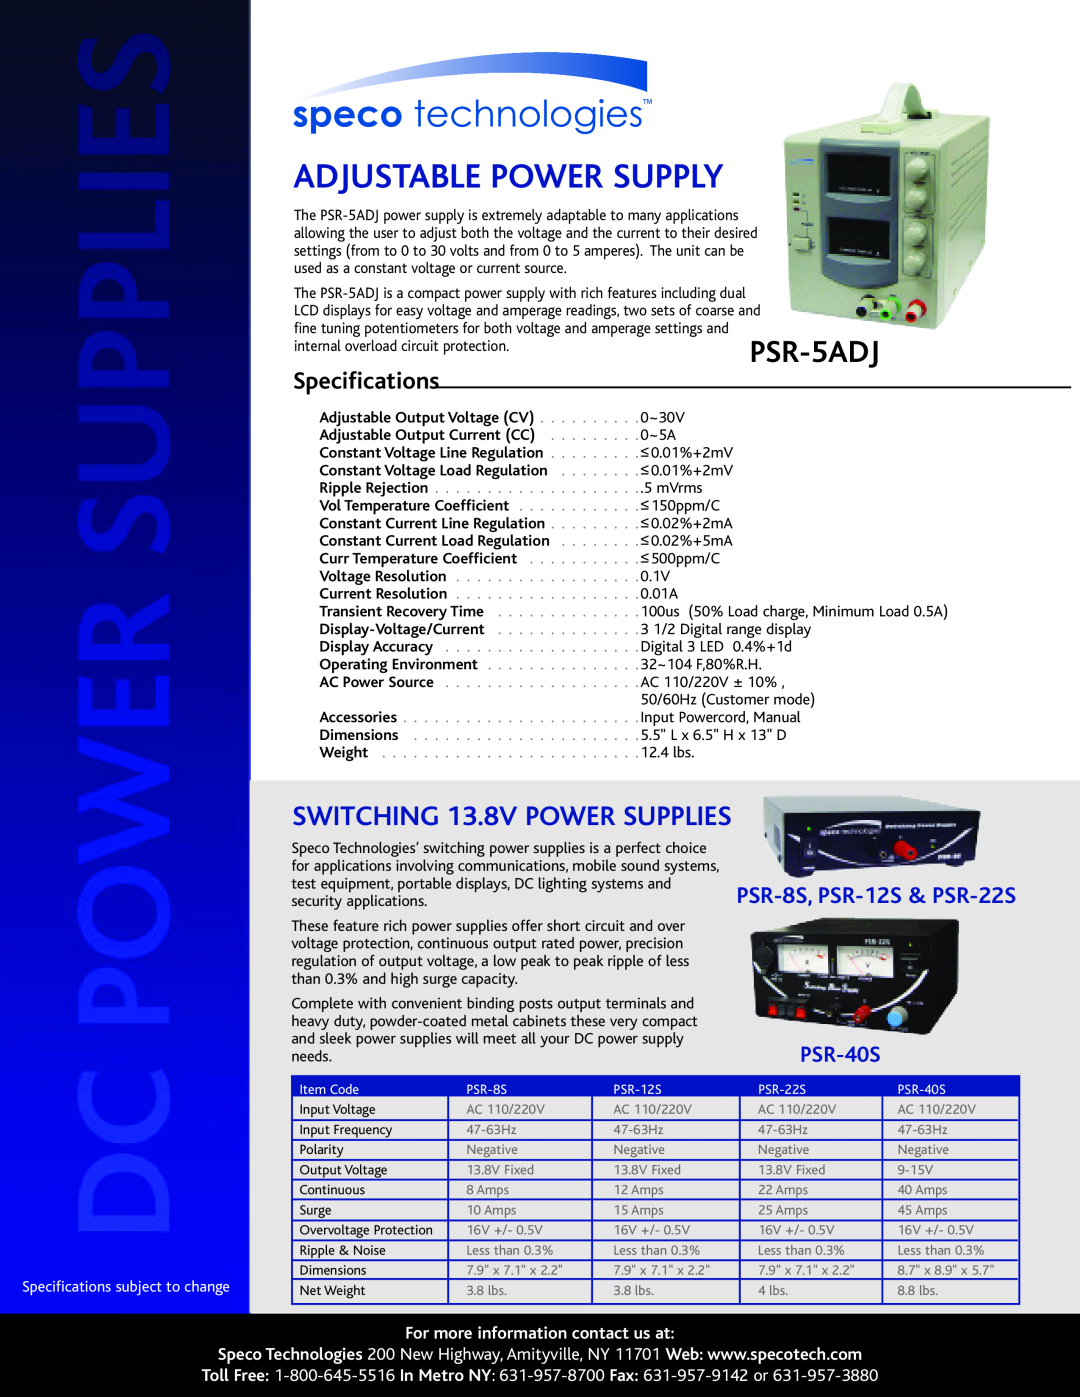 Speco Technologies PSR-8S specifications Adjustable Power Supply, PSR-5ADJ, SWITCHING 13.8V POWER SUPPLIES, PSR-40S 